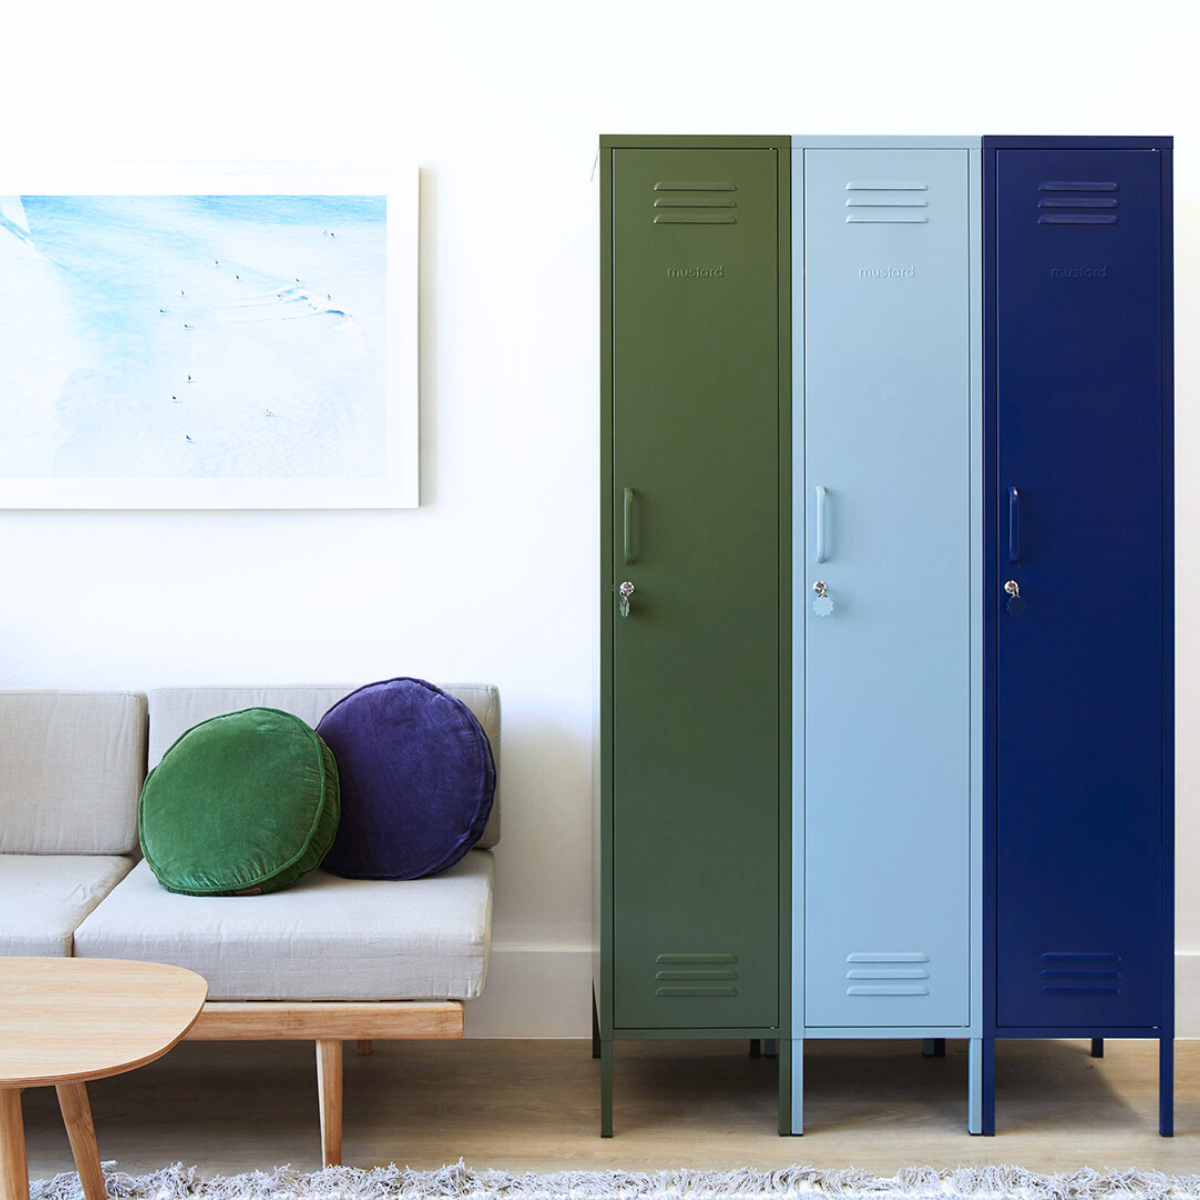 Three Mustard Made Skinny lockers stand side by side. Each is a different colour. From the left it is Olive, Ocean and then Navy. To the left of the lockers, a blue-toned artwork hangs on the wall. There is also a sofa with a timber frame, beige padding and two round cushions sitting on top — one blue and the other green. 